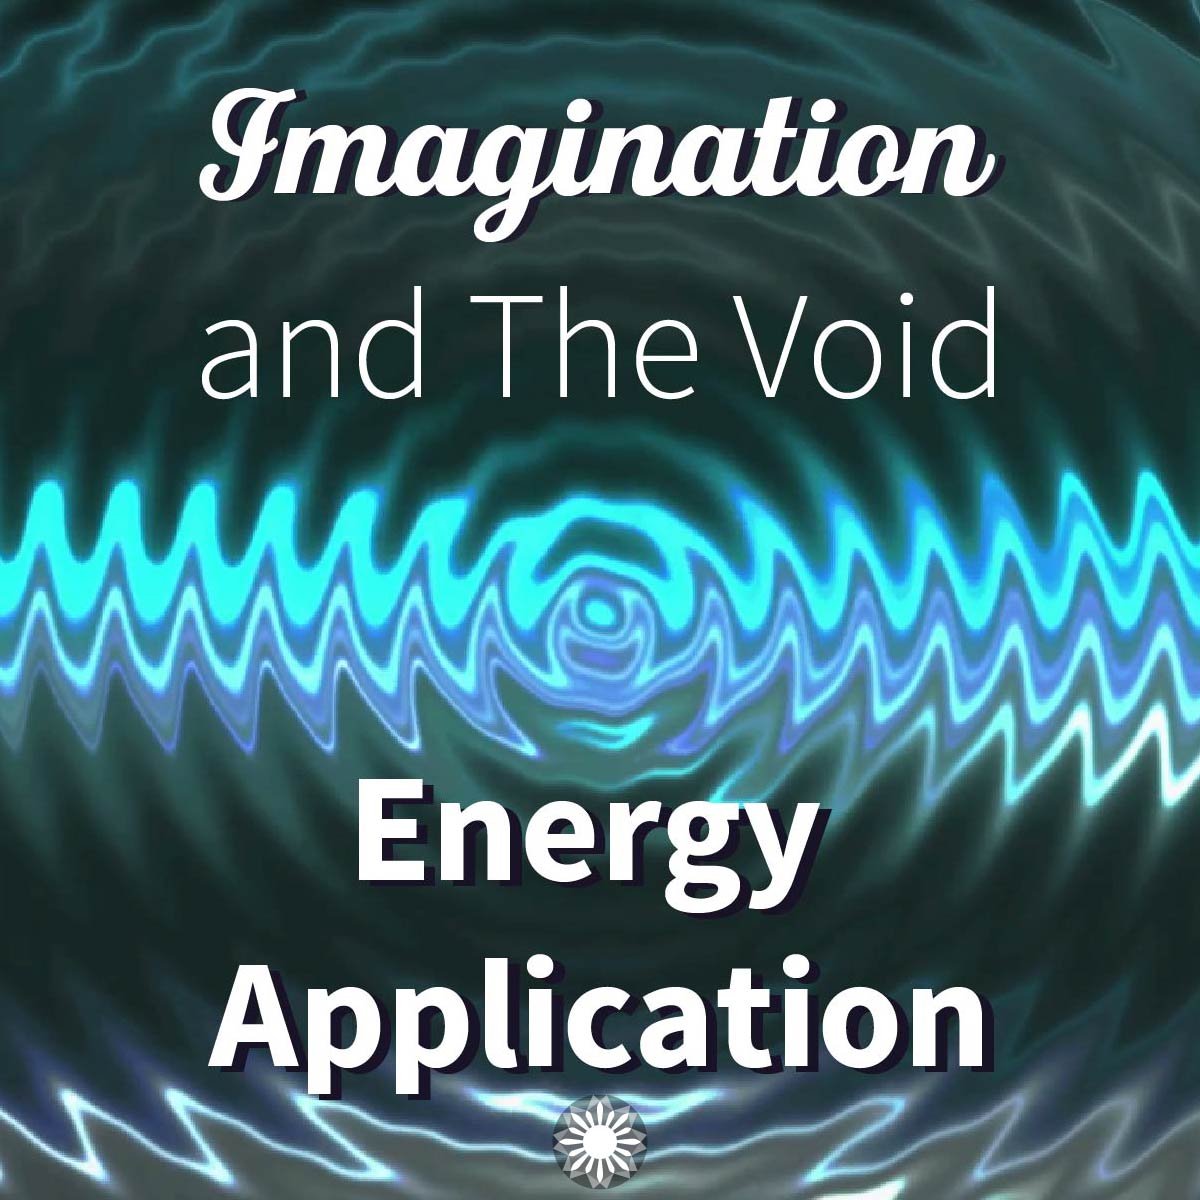 Imagination and The Void Energy Application | Expand with Julius and Xpnsion Network